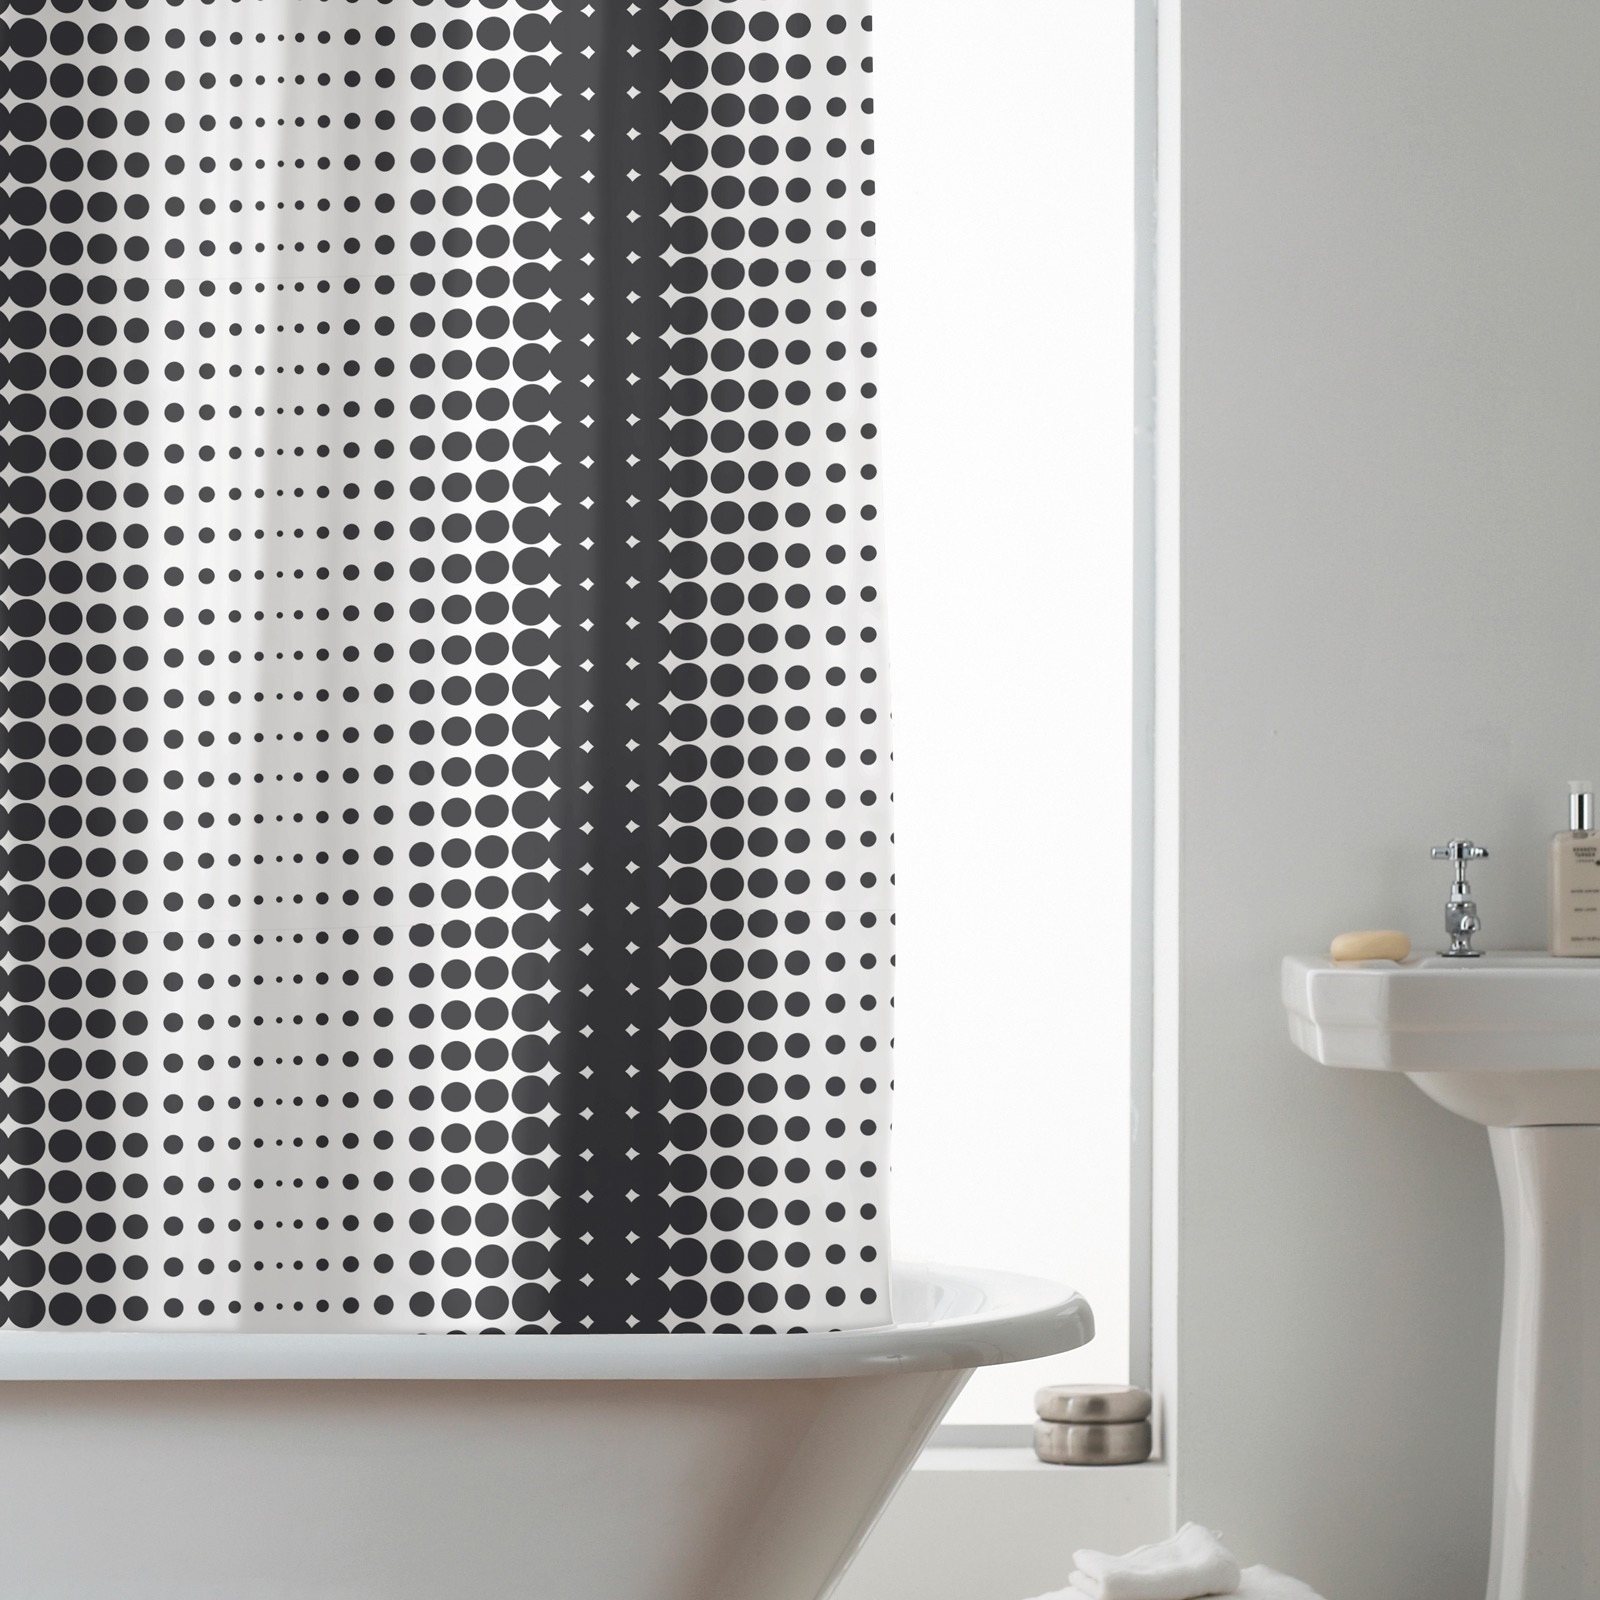 'Halftone' White Black Hookless Without Hook Shower Curtain